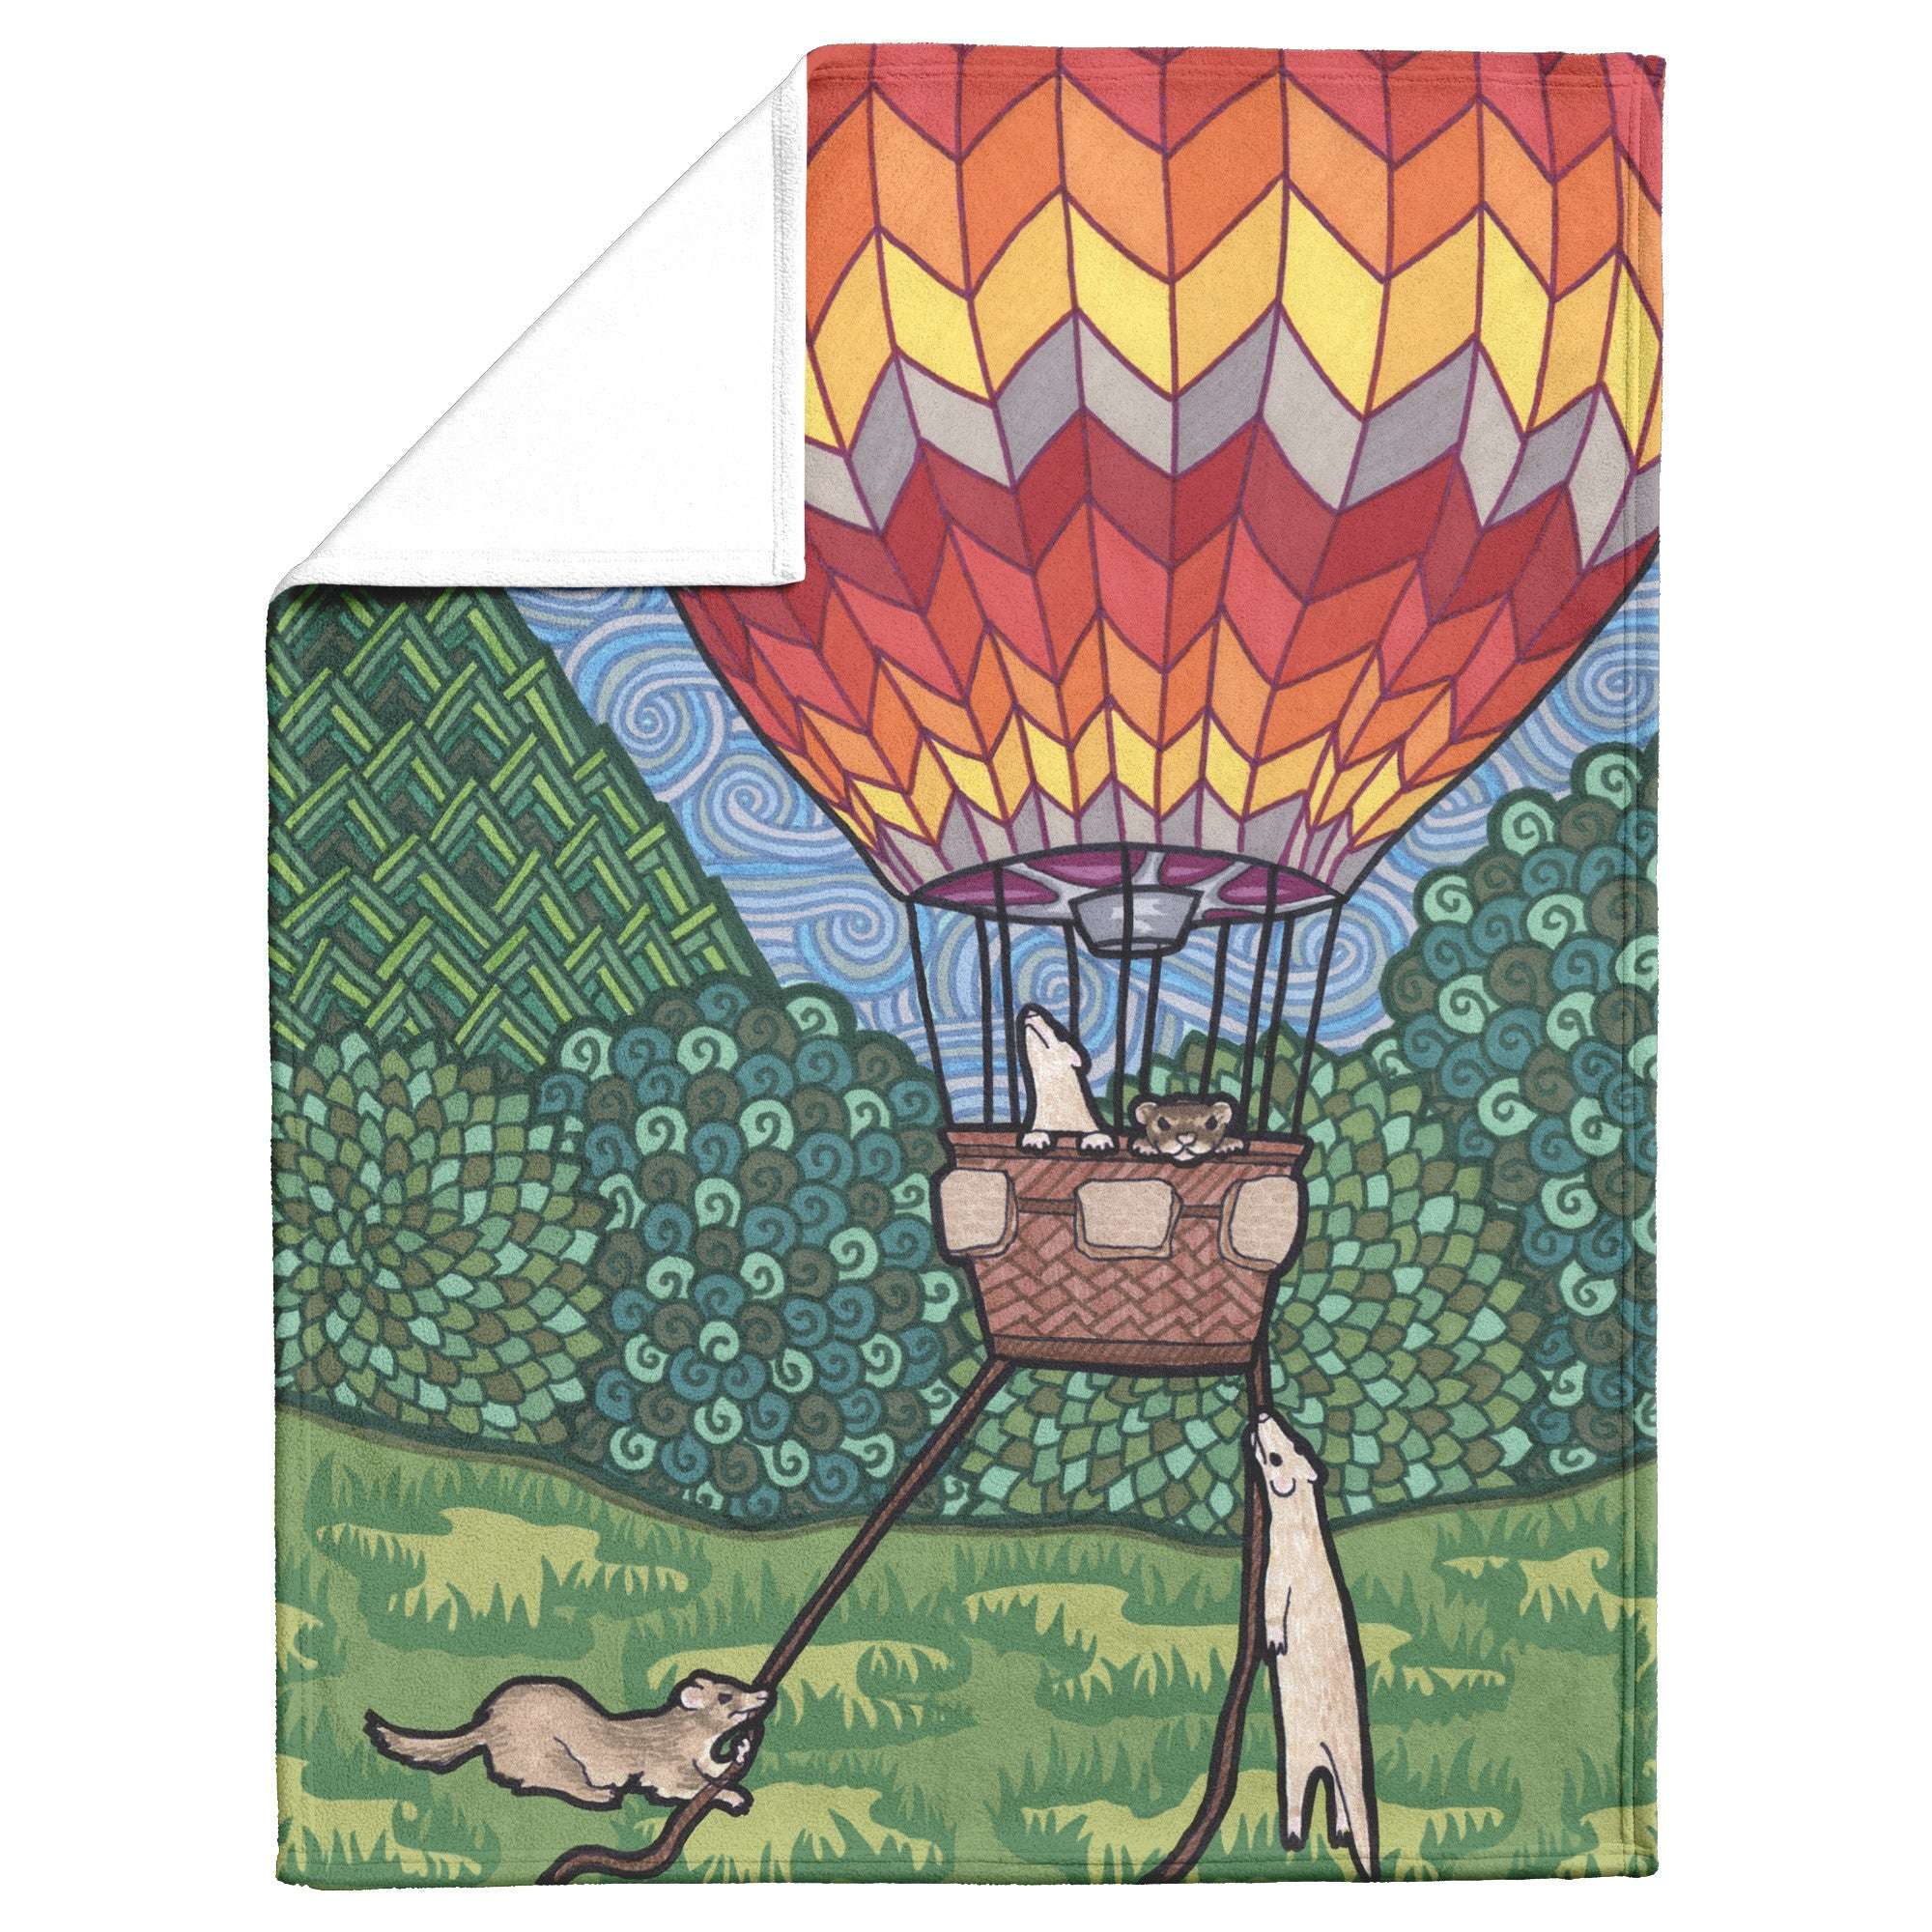 A whimsical design of a hot air balloon with ferrets in the basket, floating over a green landscape, illustrated on a Ferret Blanket.